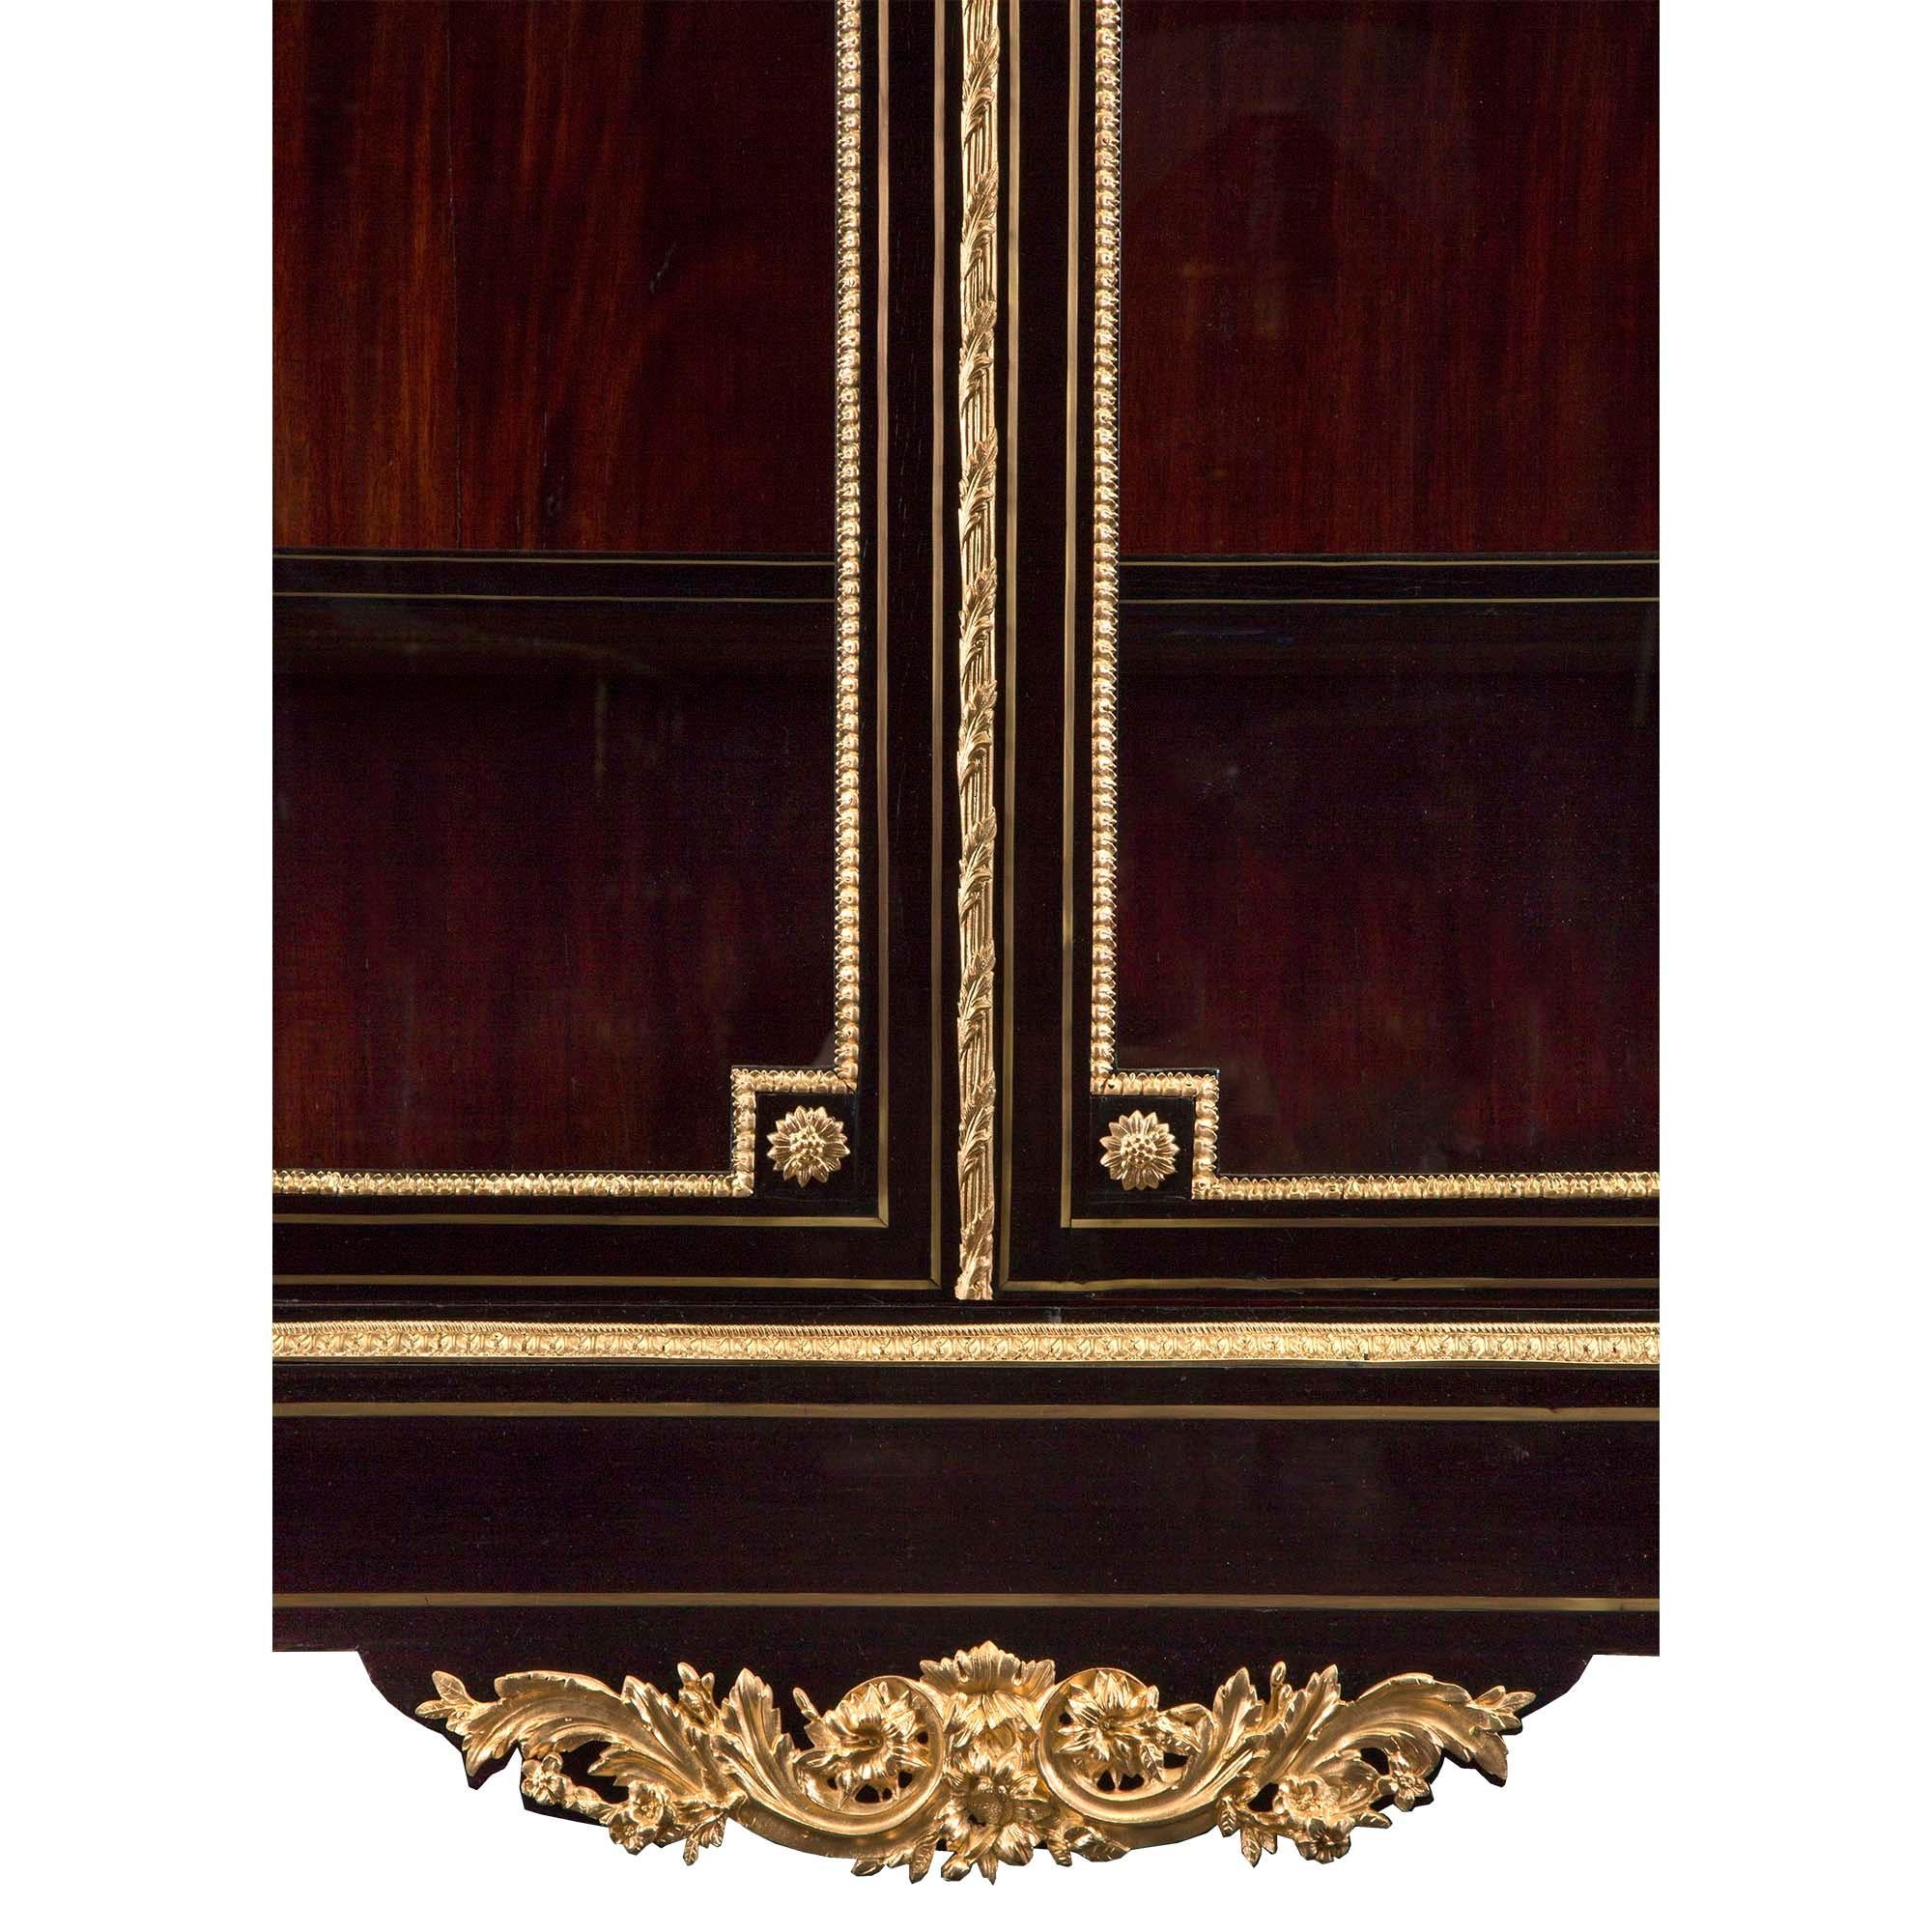 French 19th Century Napoleon III Period Ebony, Brass and Ormolu Boulle Vitrine For Sale 3